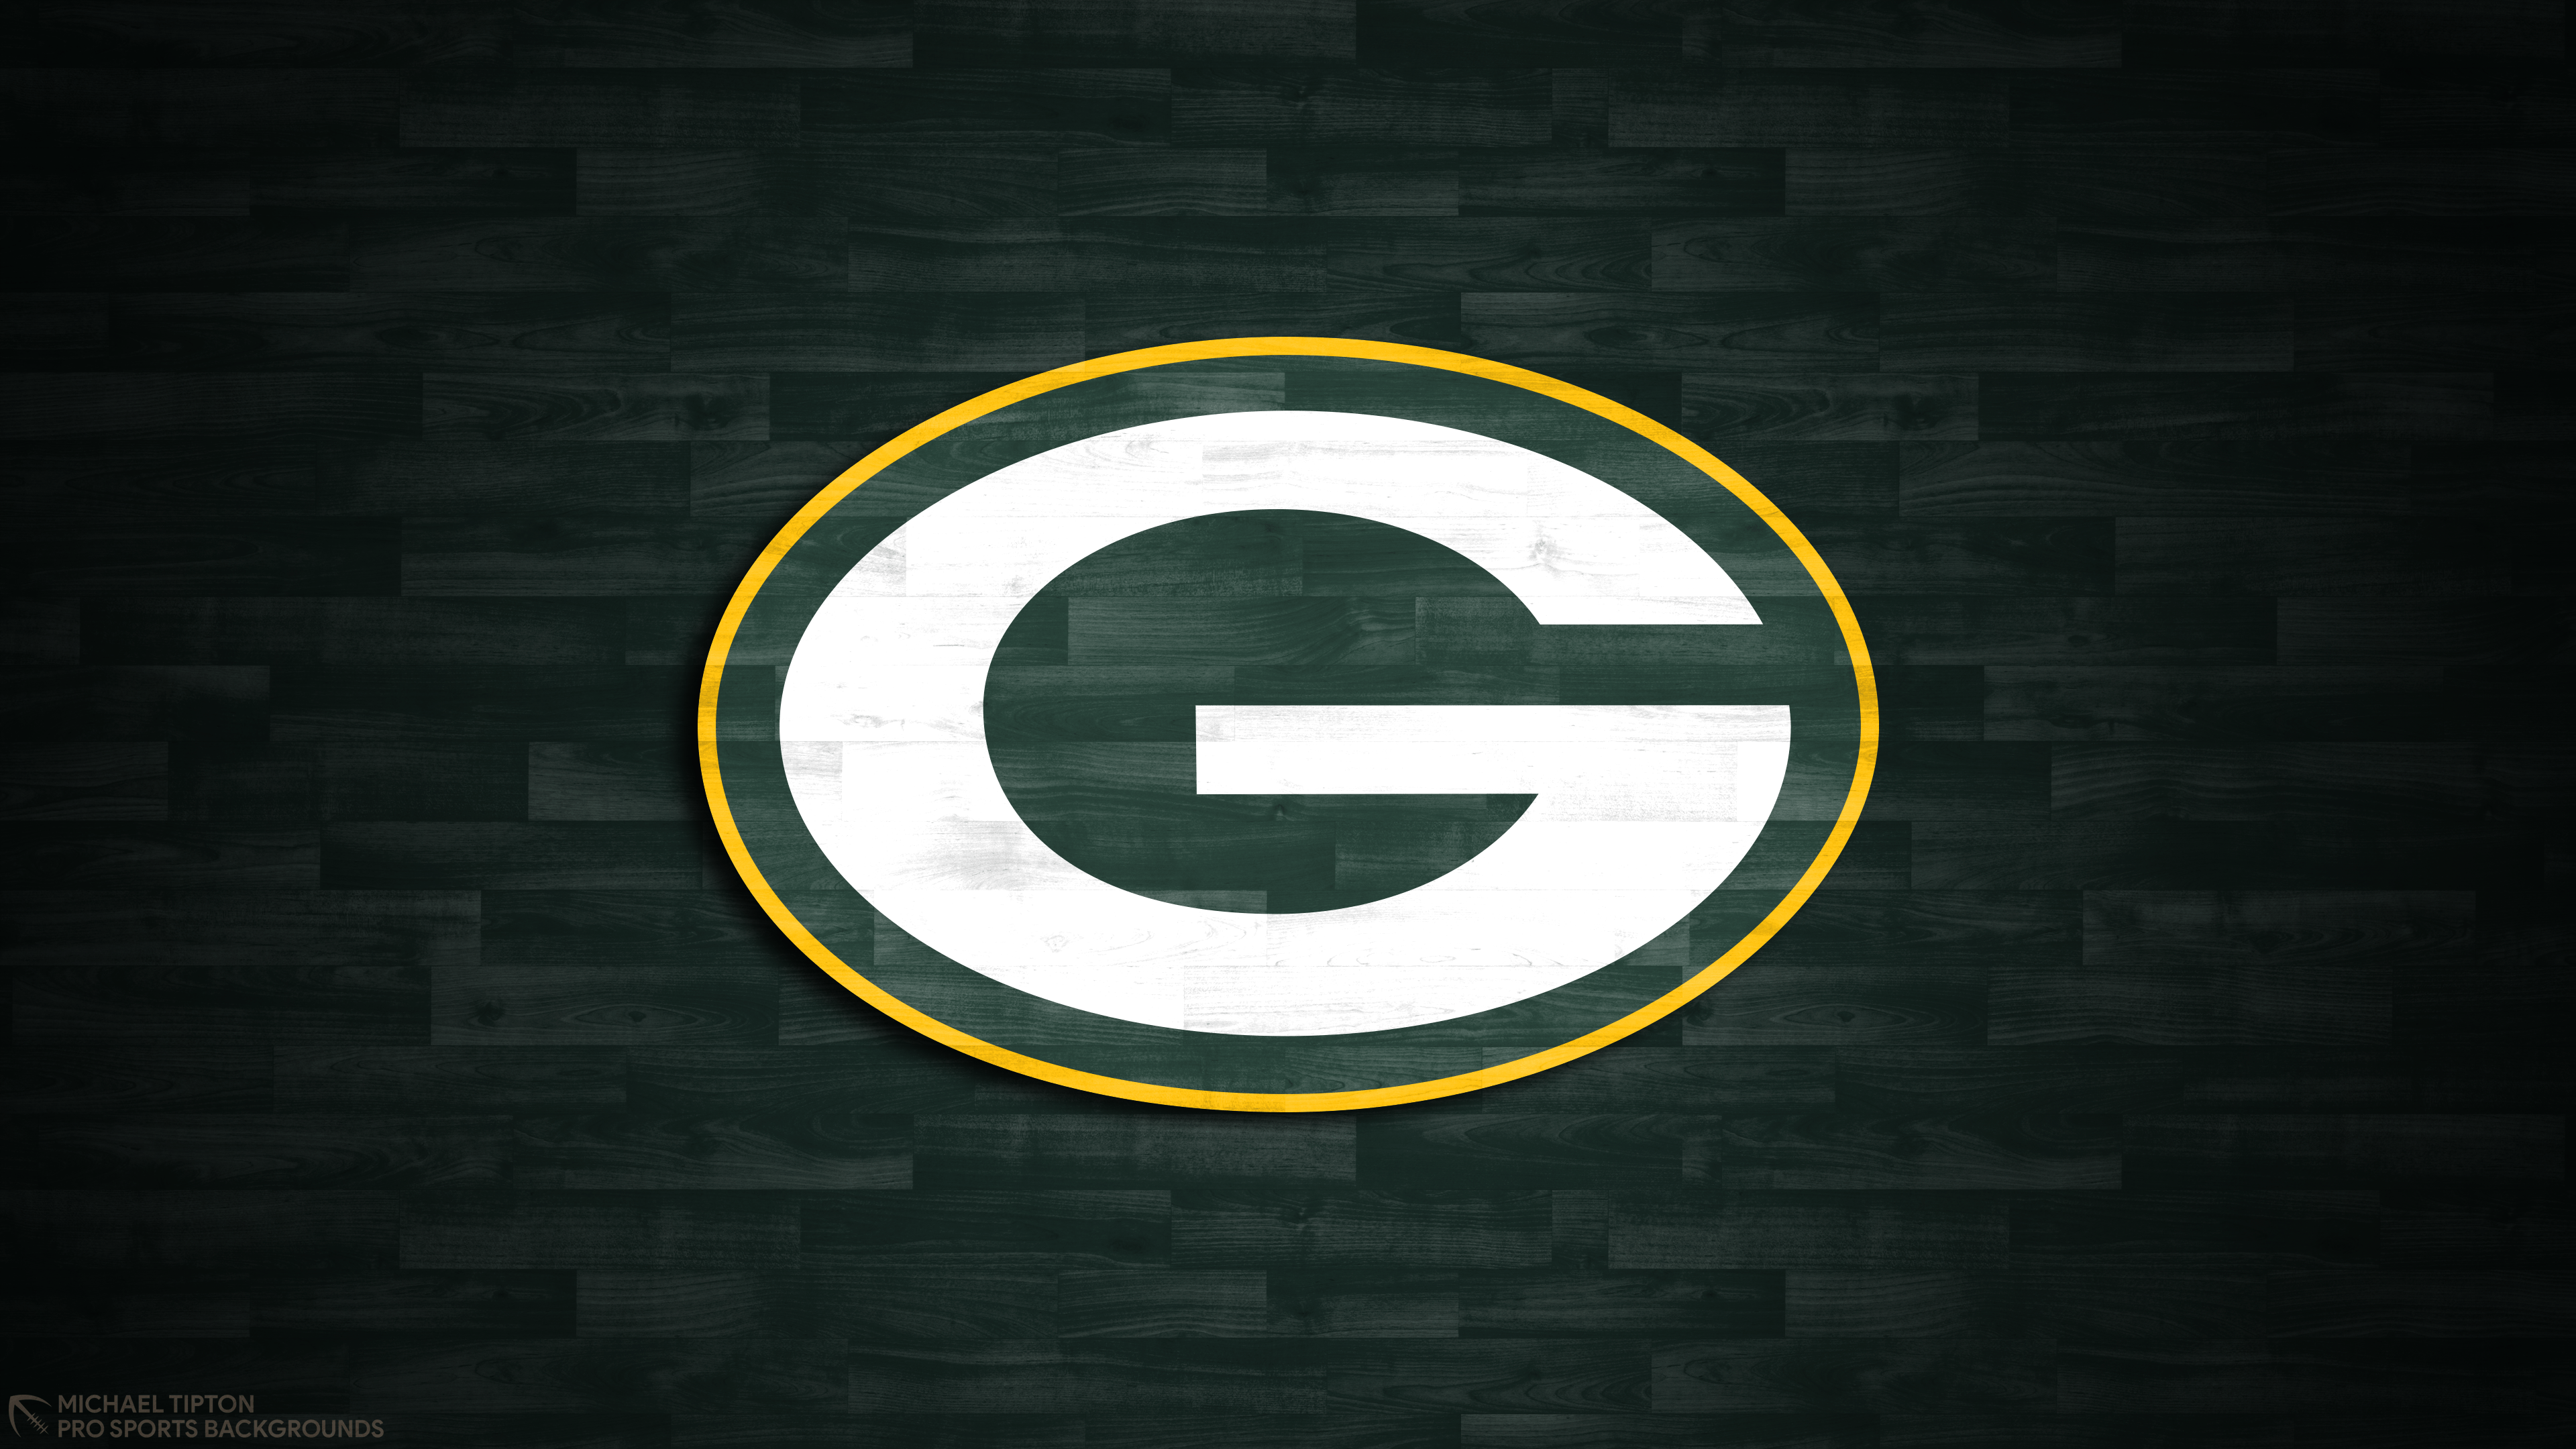 Green Bay Packers 2019 Wallpapers - Wallpaper Cave